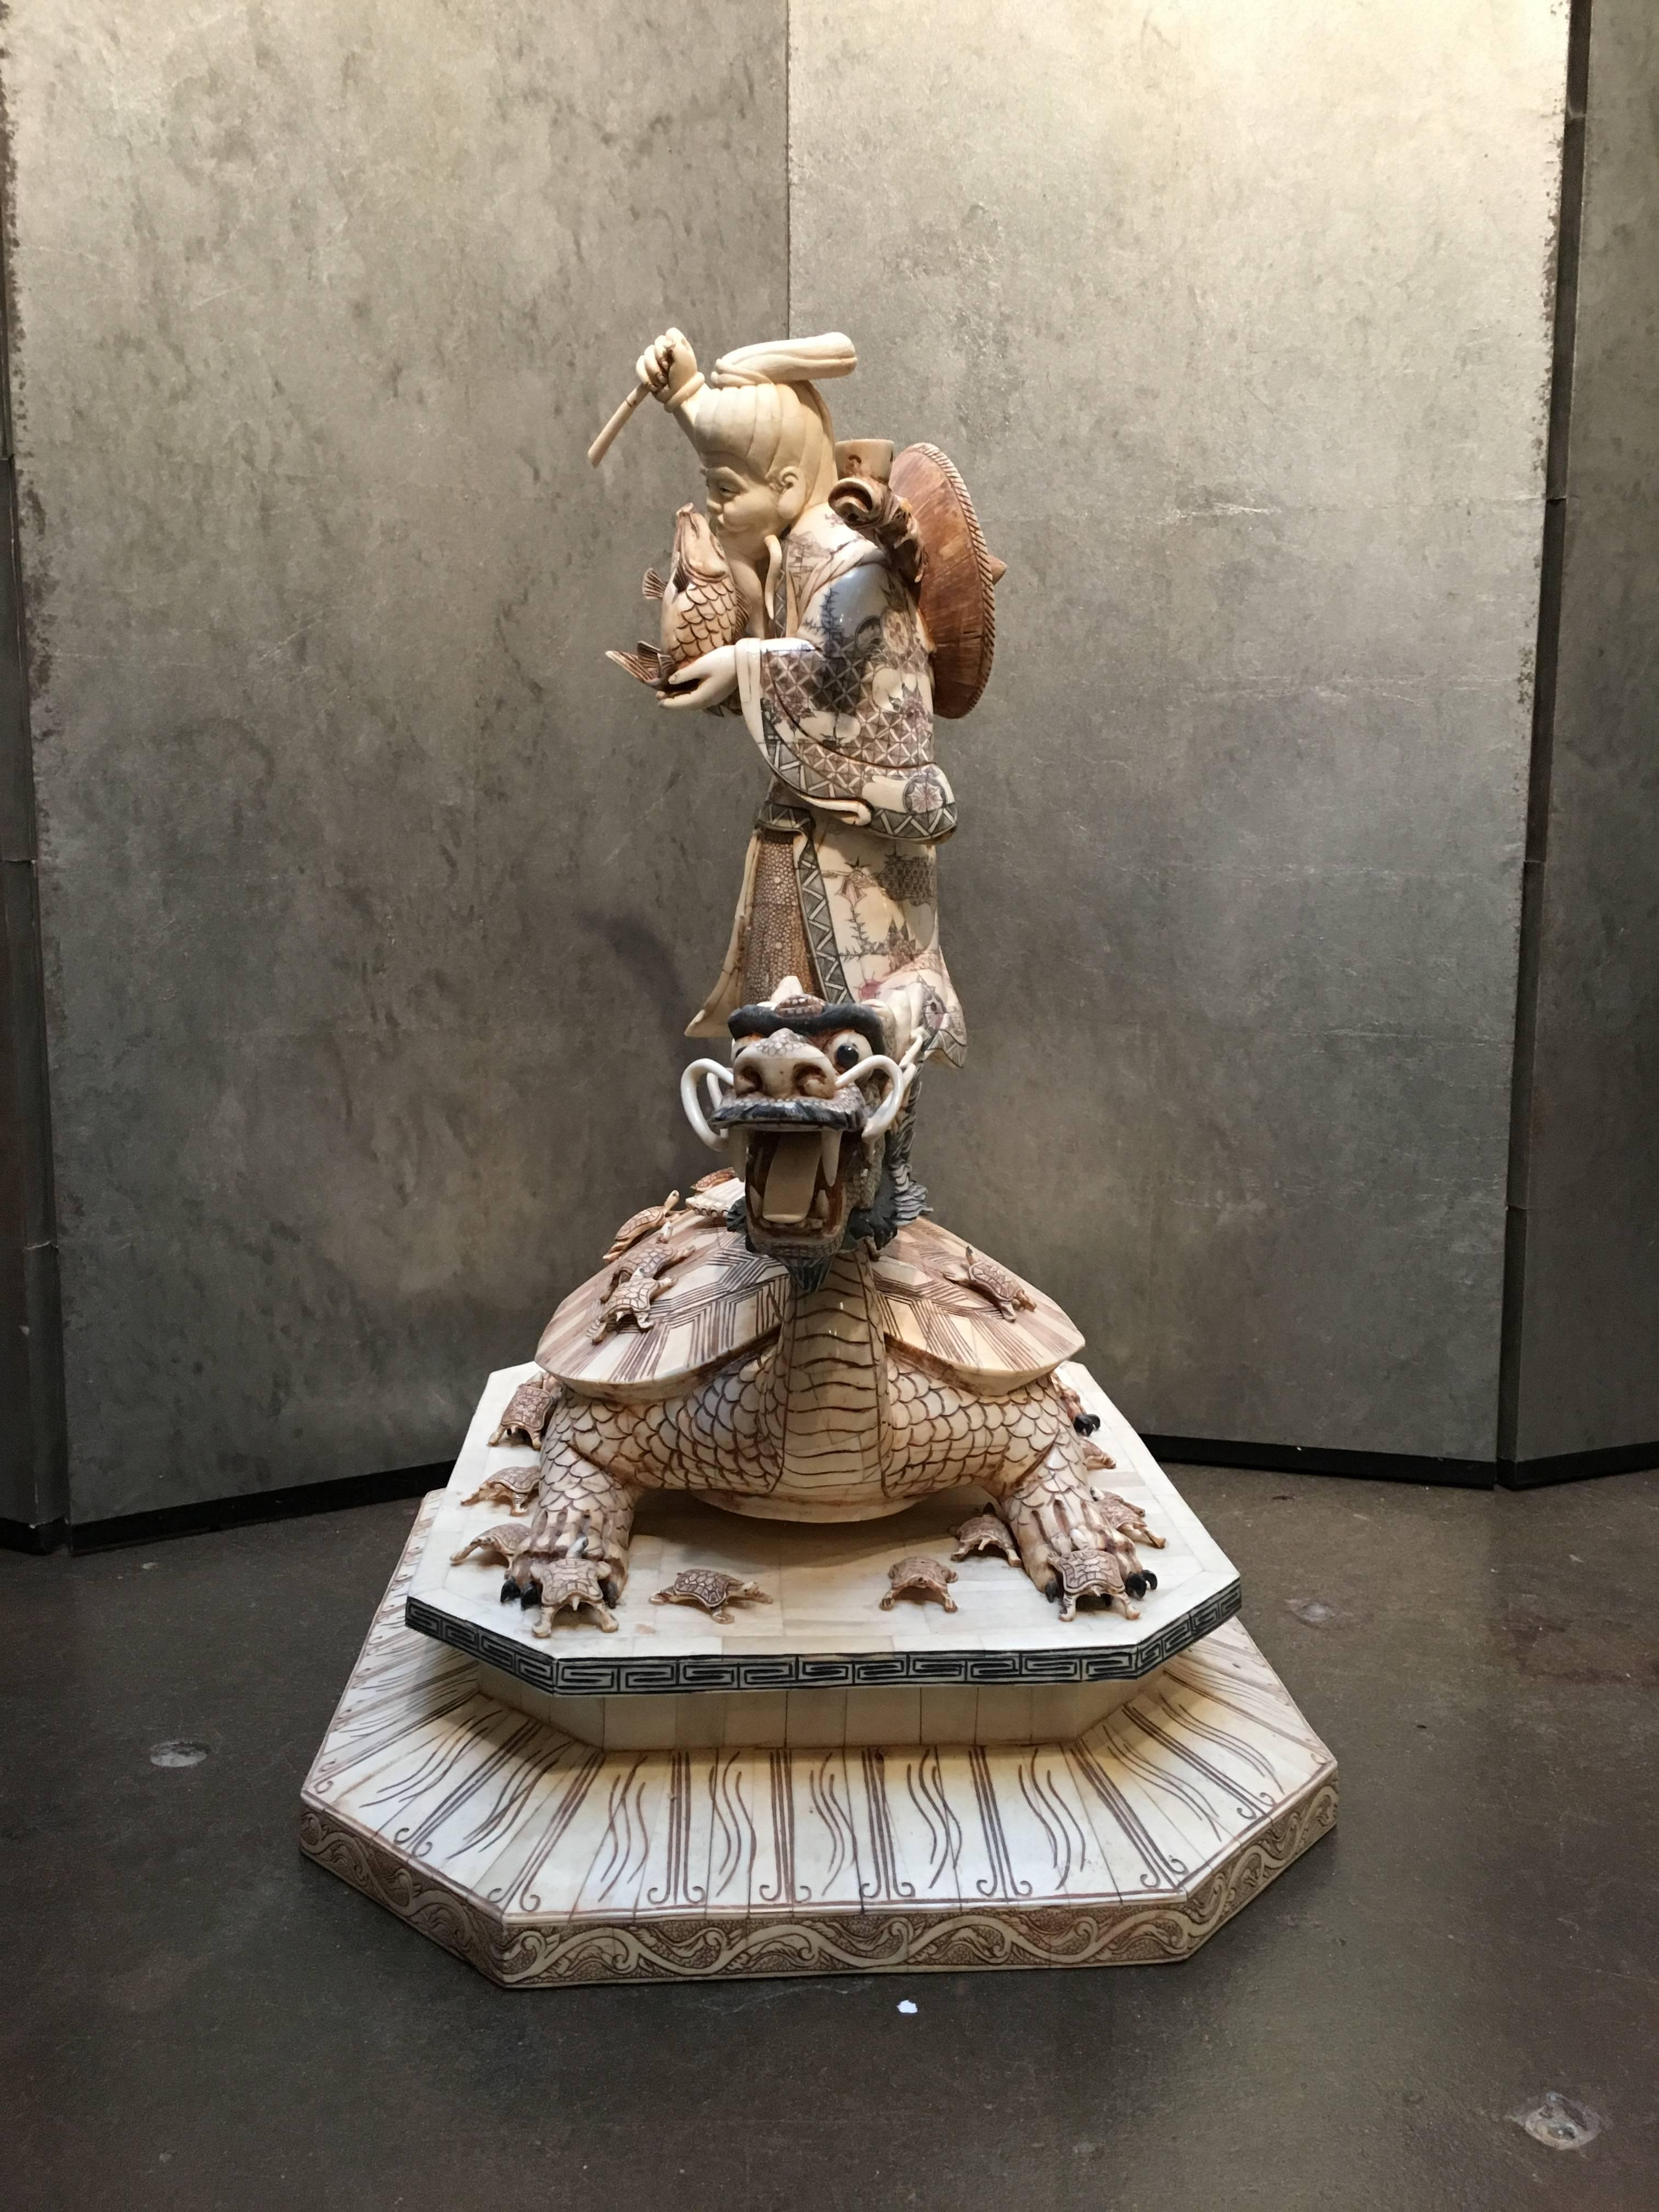 A large and fantastic vintage Japanese bone veneered sculpture of Ebisu, the Japanese God of the Sea,  riding a mythical turtle dragon, circa 1980's, Japan.

Ebisu, patron god of fisherman, the god of luck, and one of the Seven Lucky Gods, is